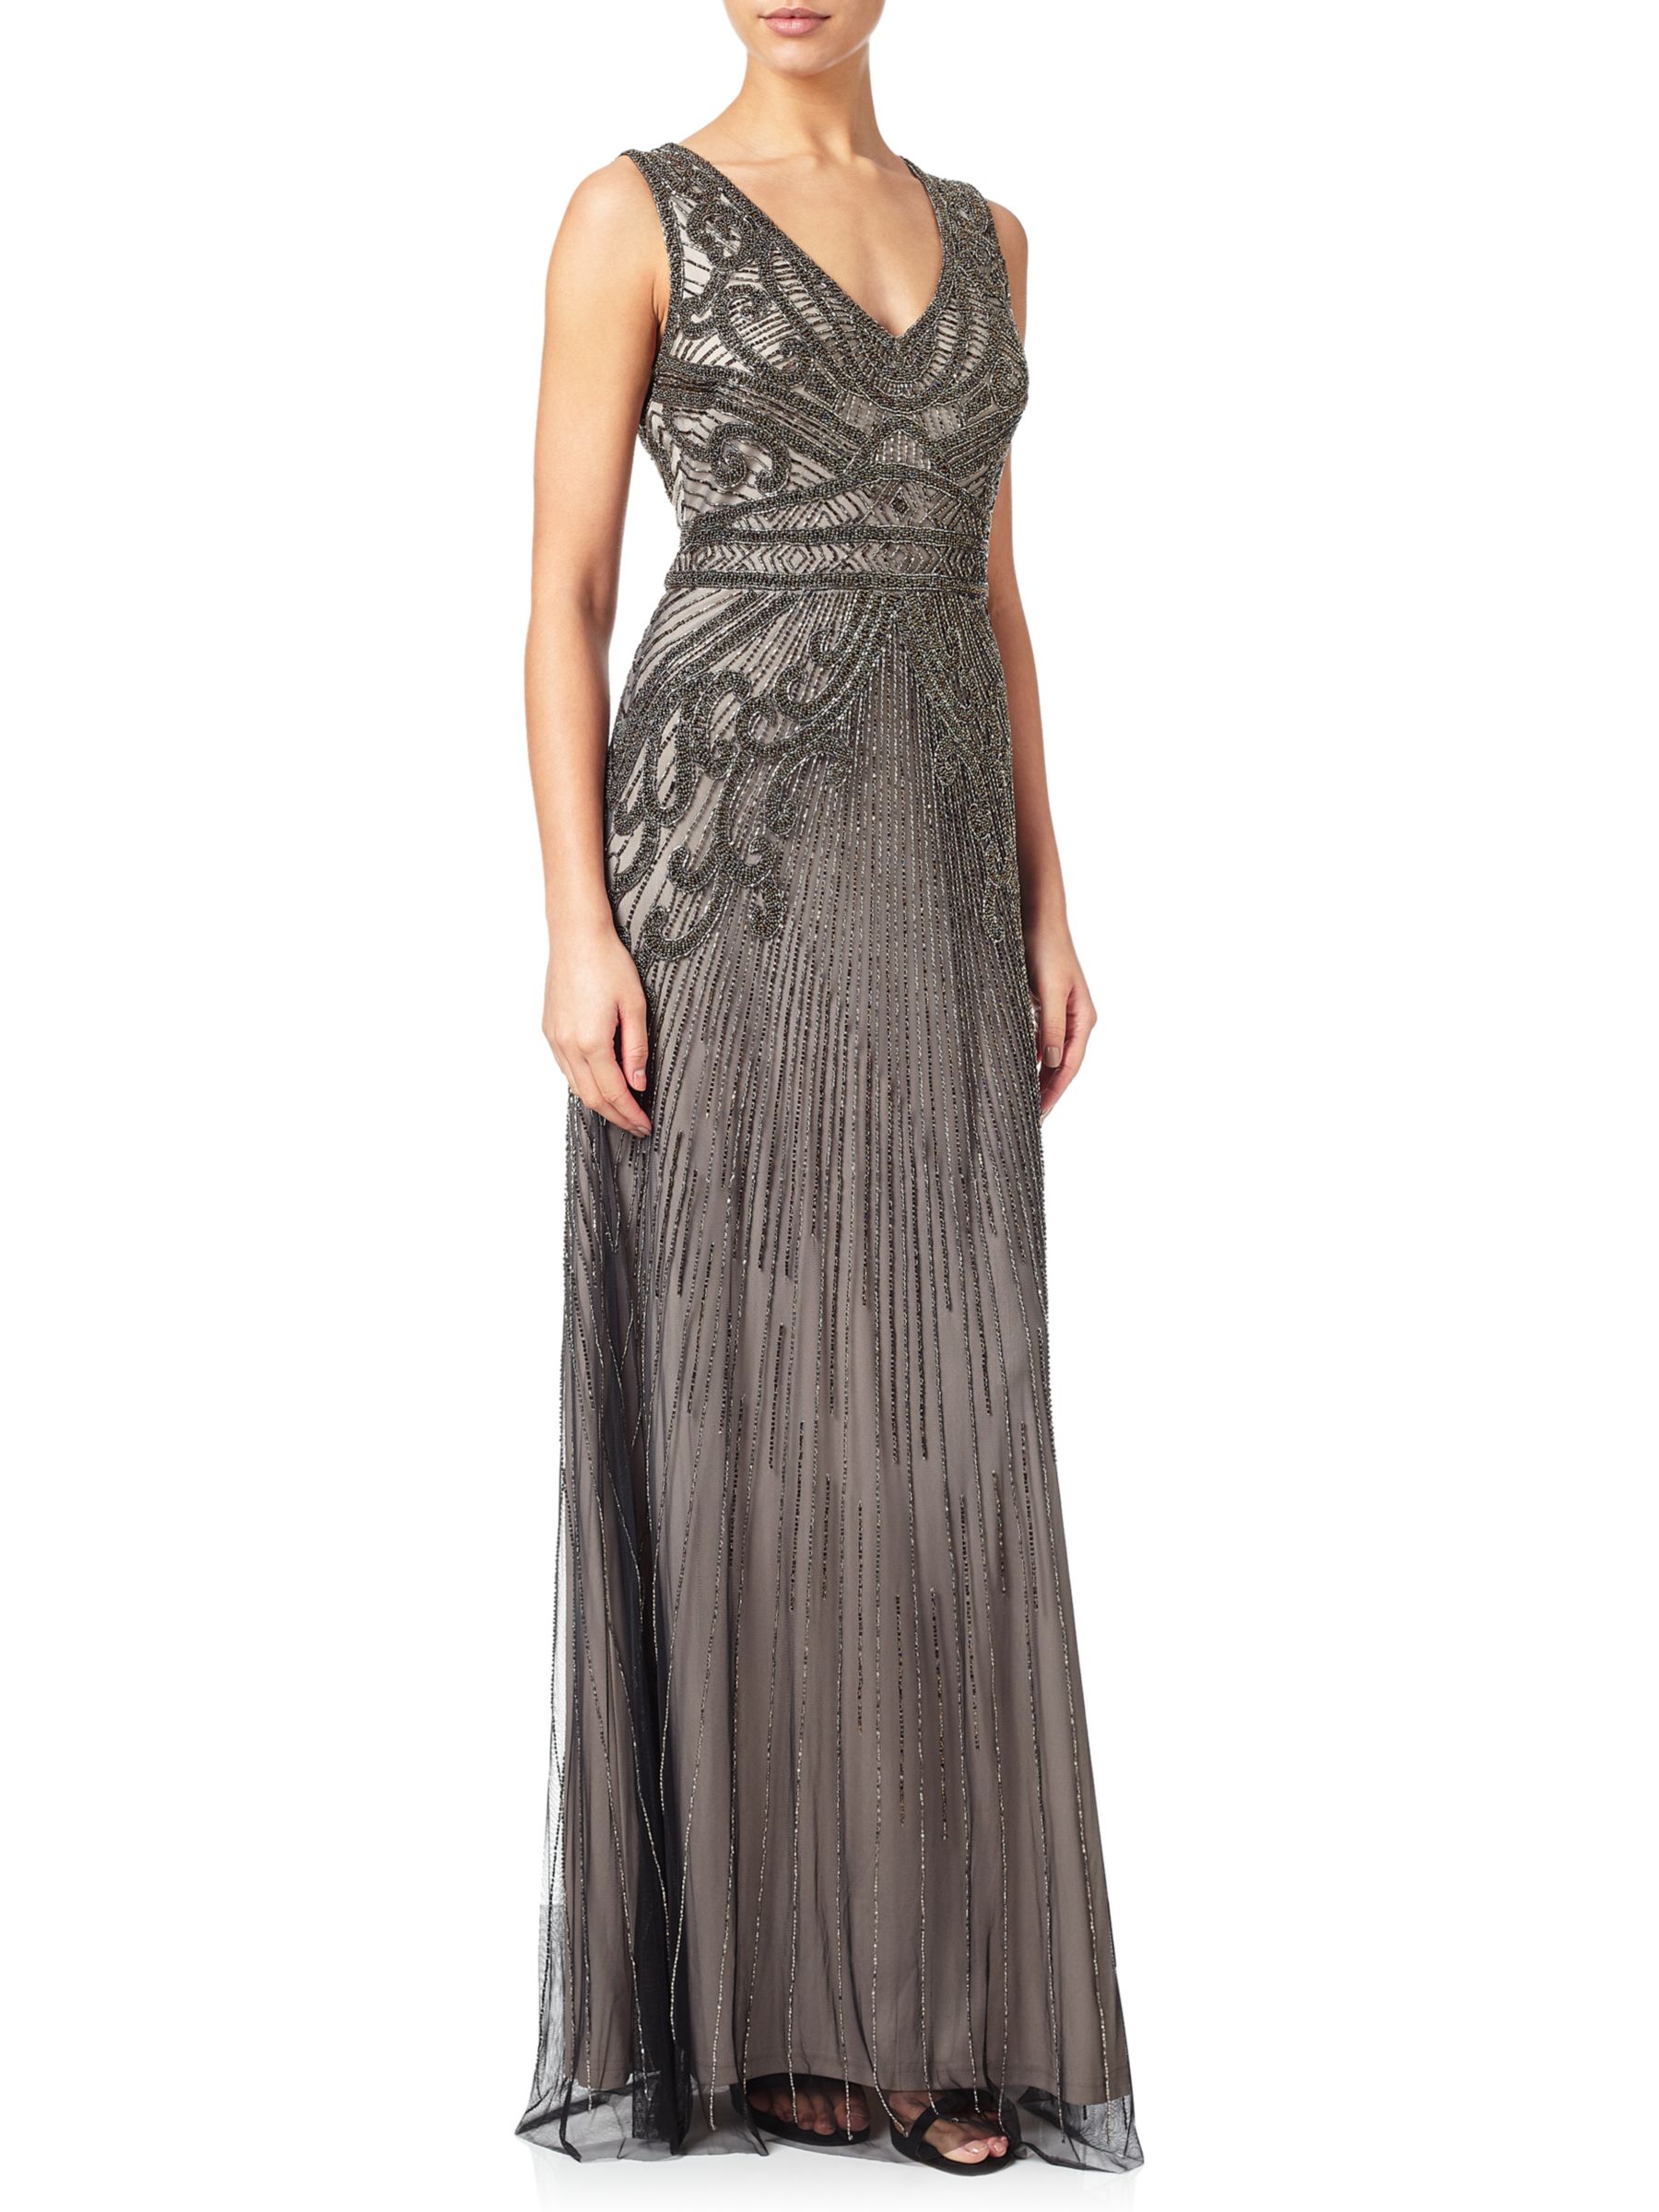 Adrianna Papell Fully Beaded Sleeveless Gown, Platinum